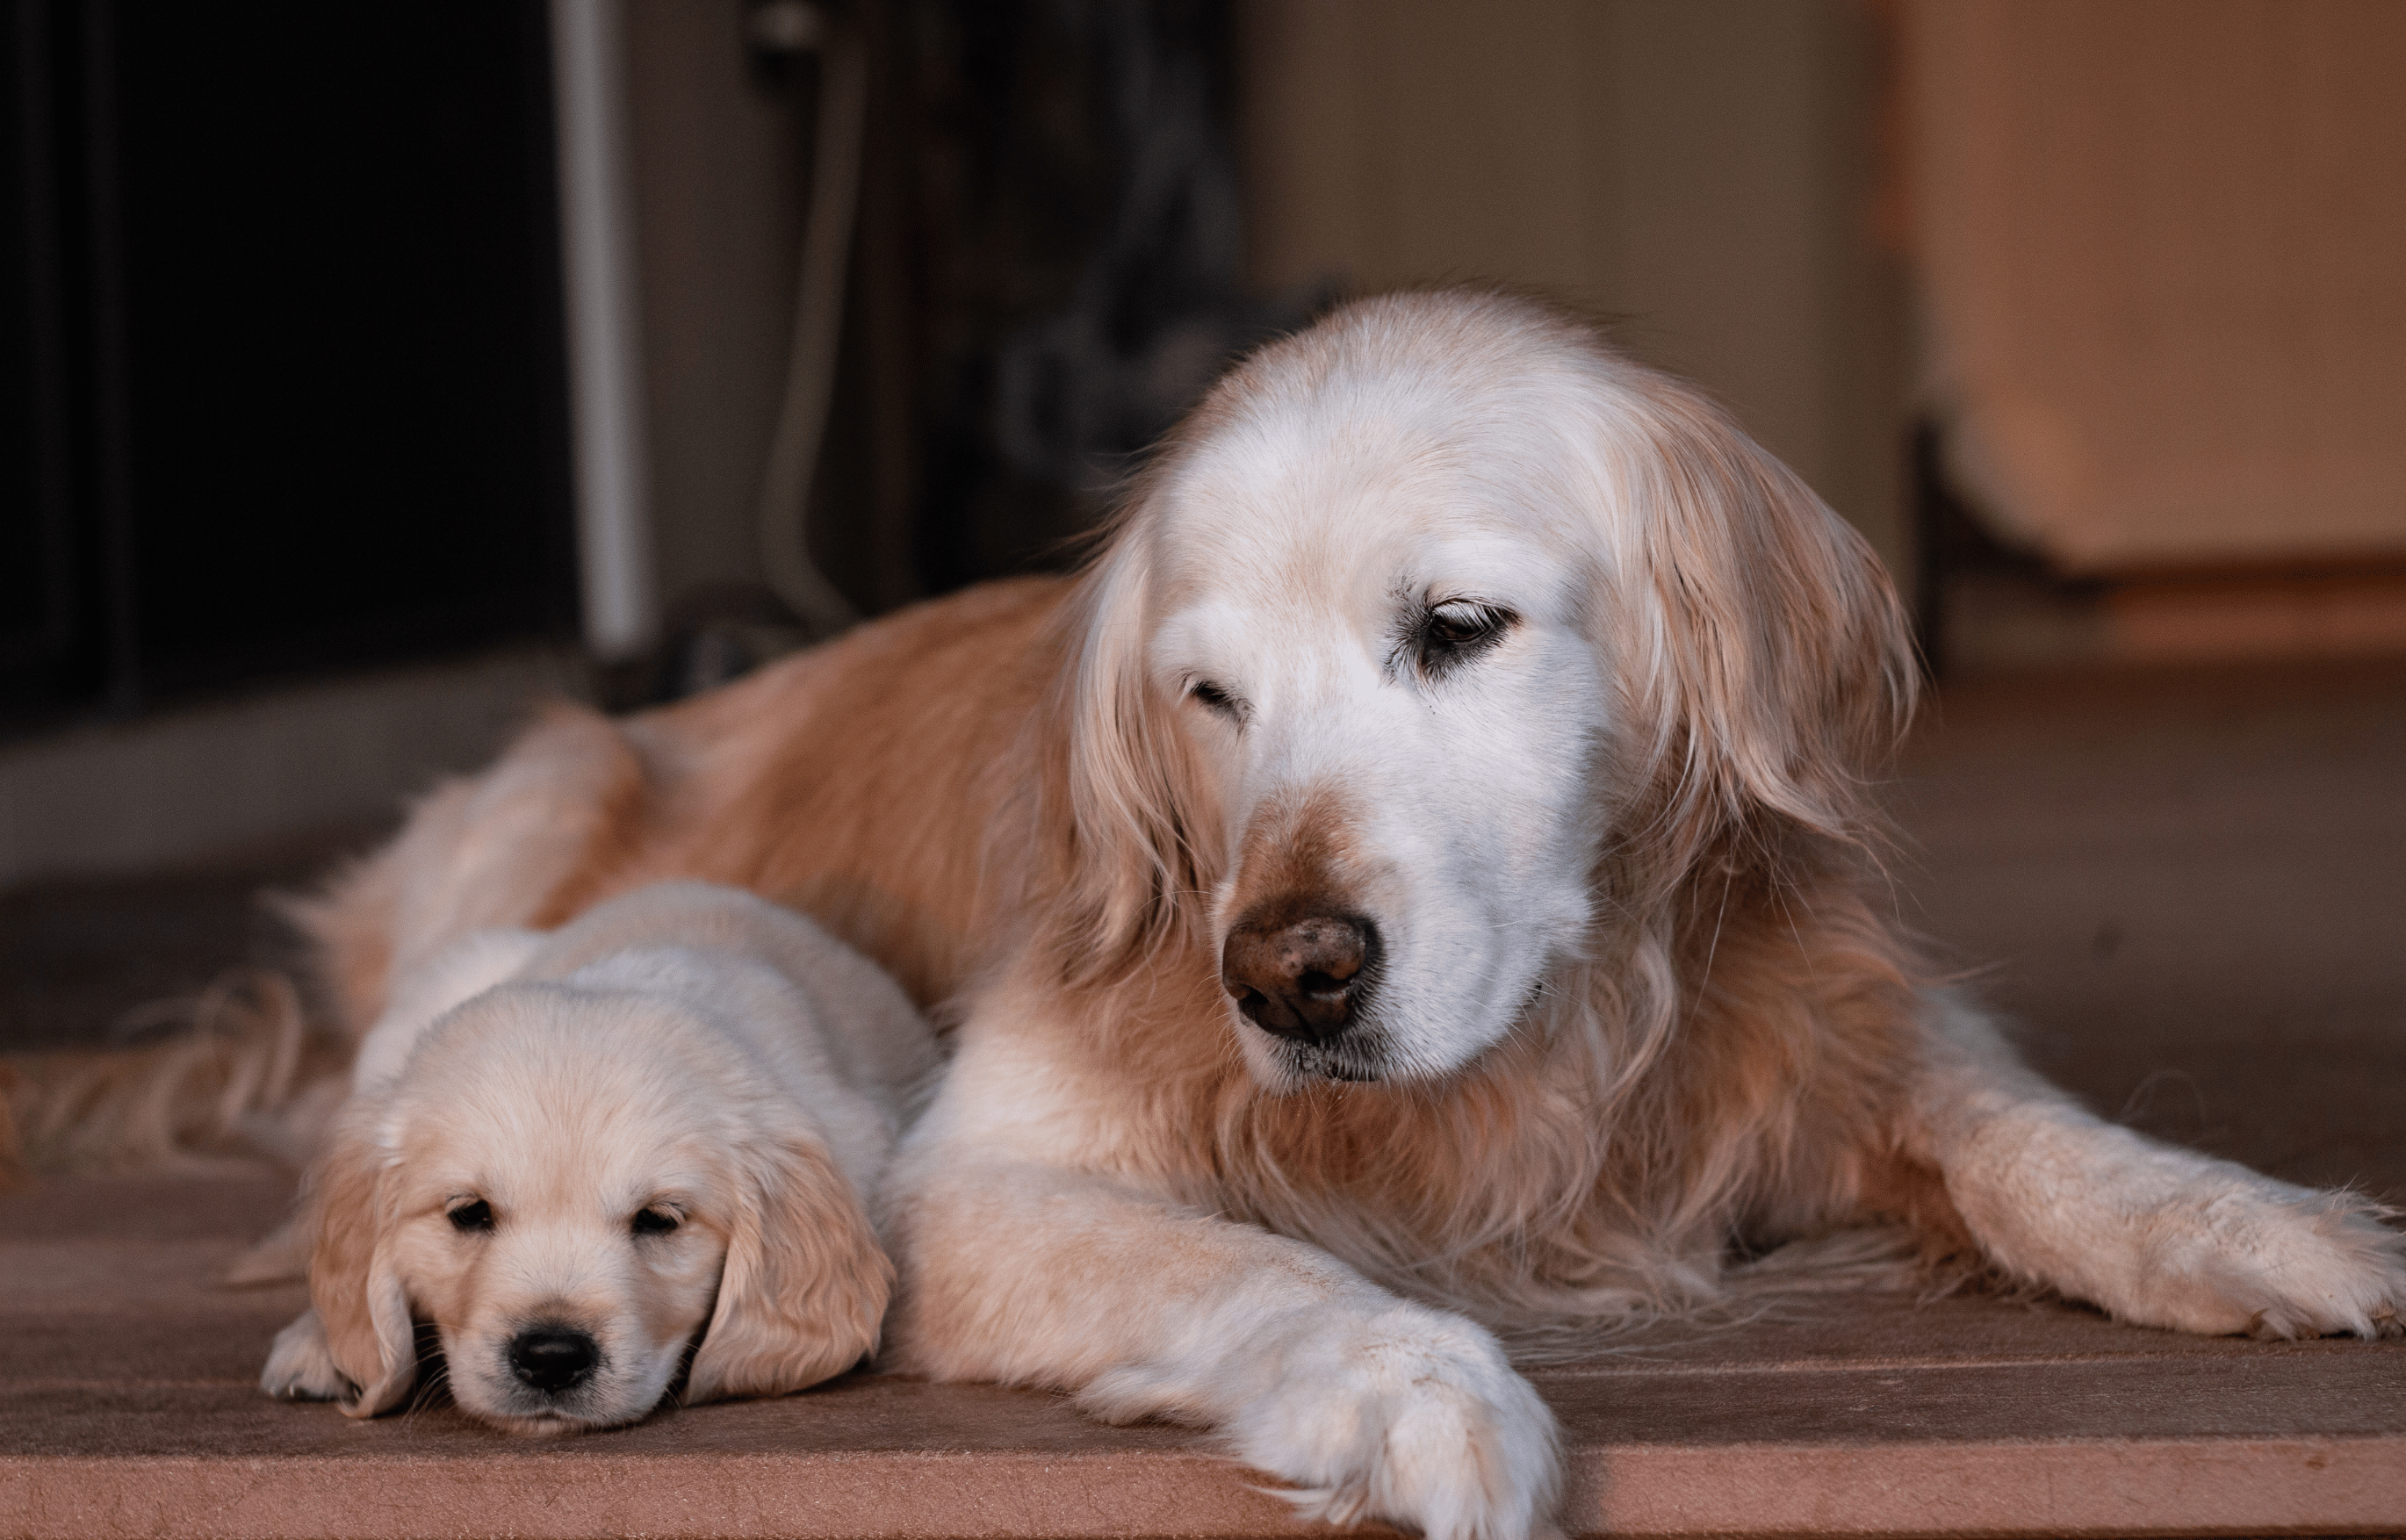 Introducing a puppy to your older dog